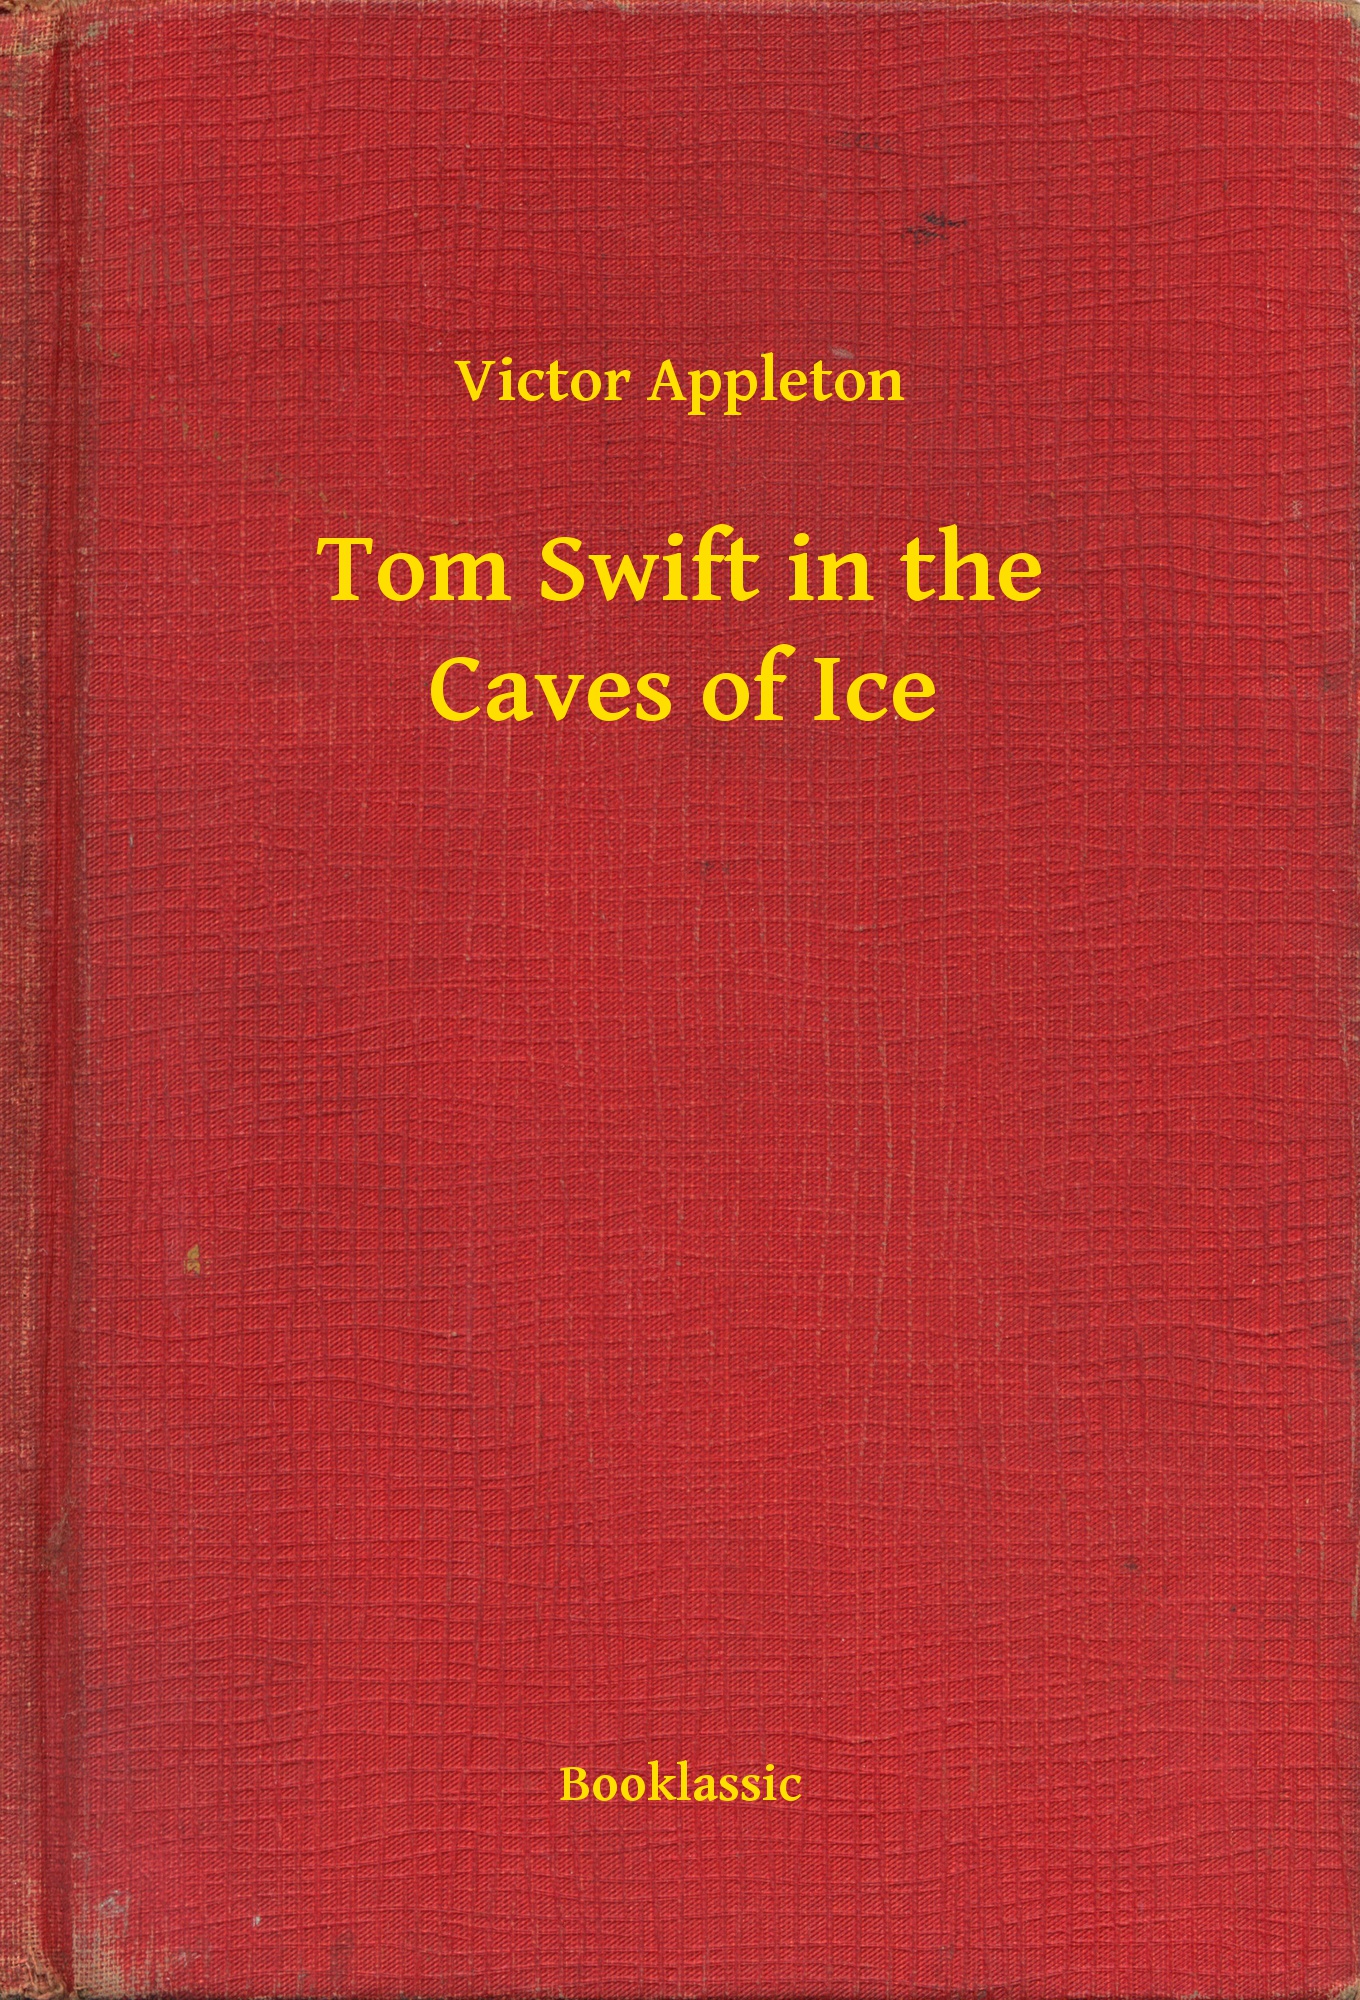 Tom Swift in the Caves of Ice